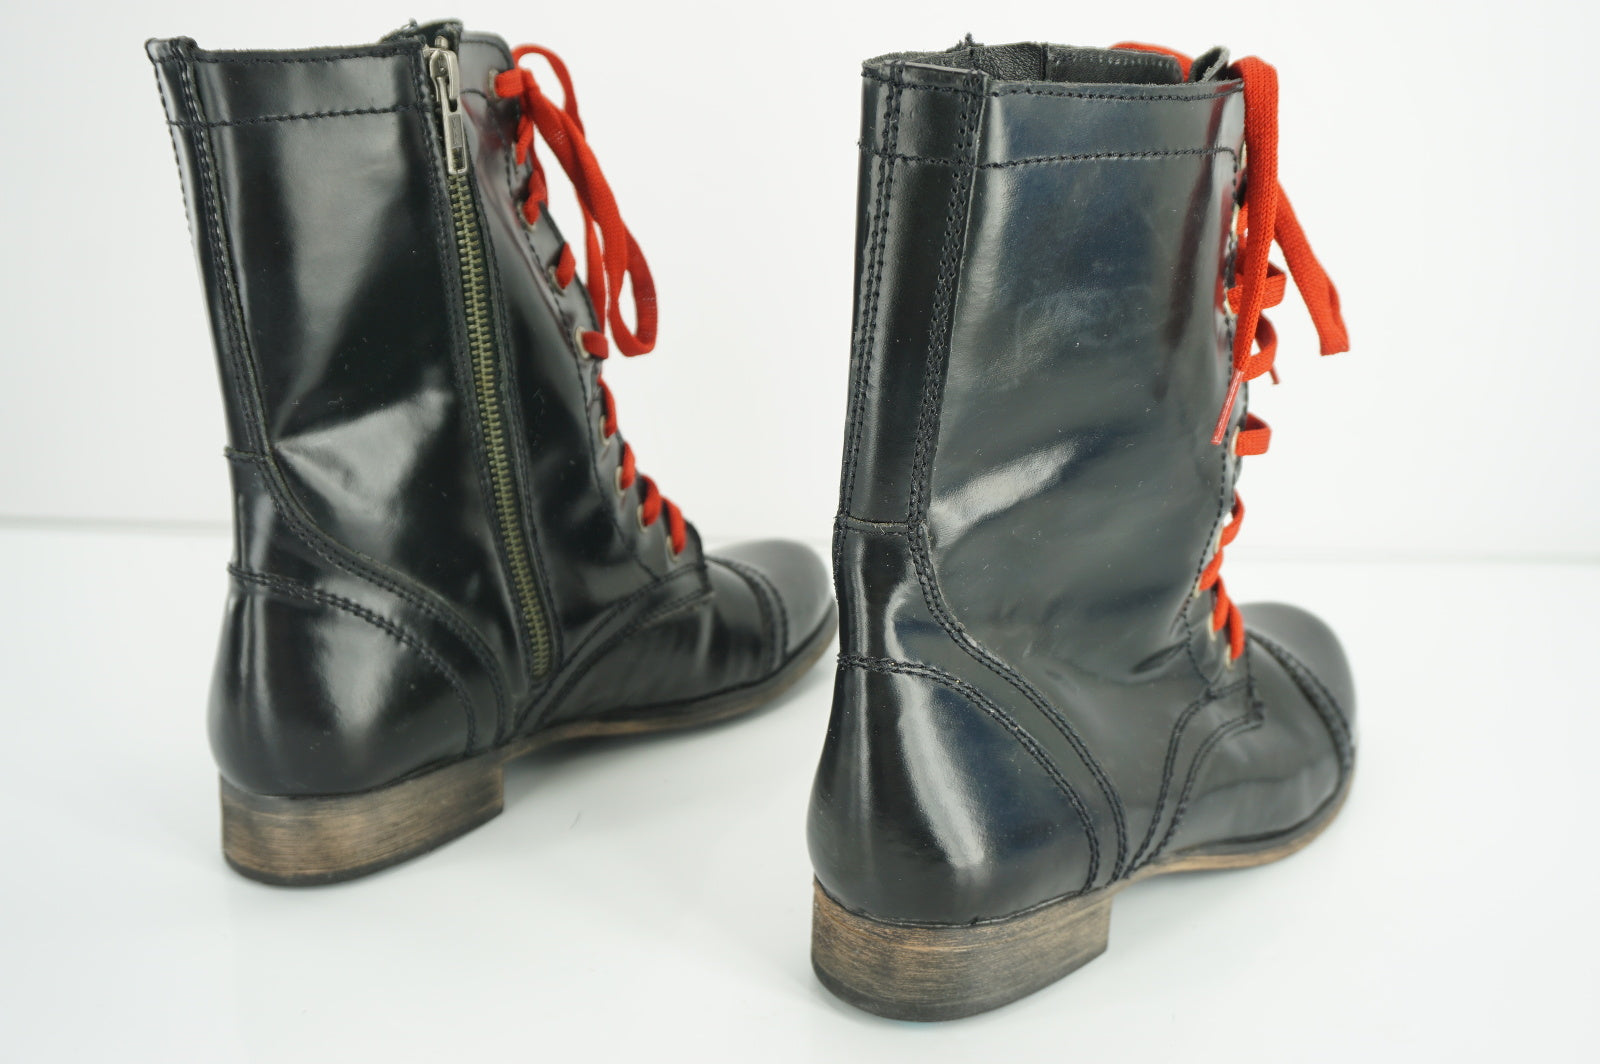 Steve Madden Troopale Black Leather Ankle Boots SZ 7.5 Military $130 Combat